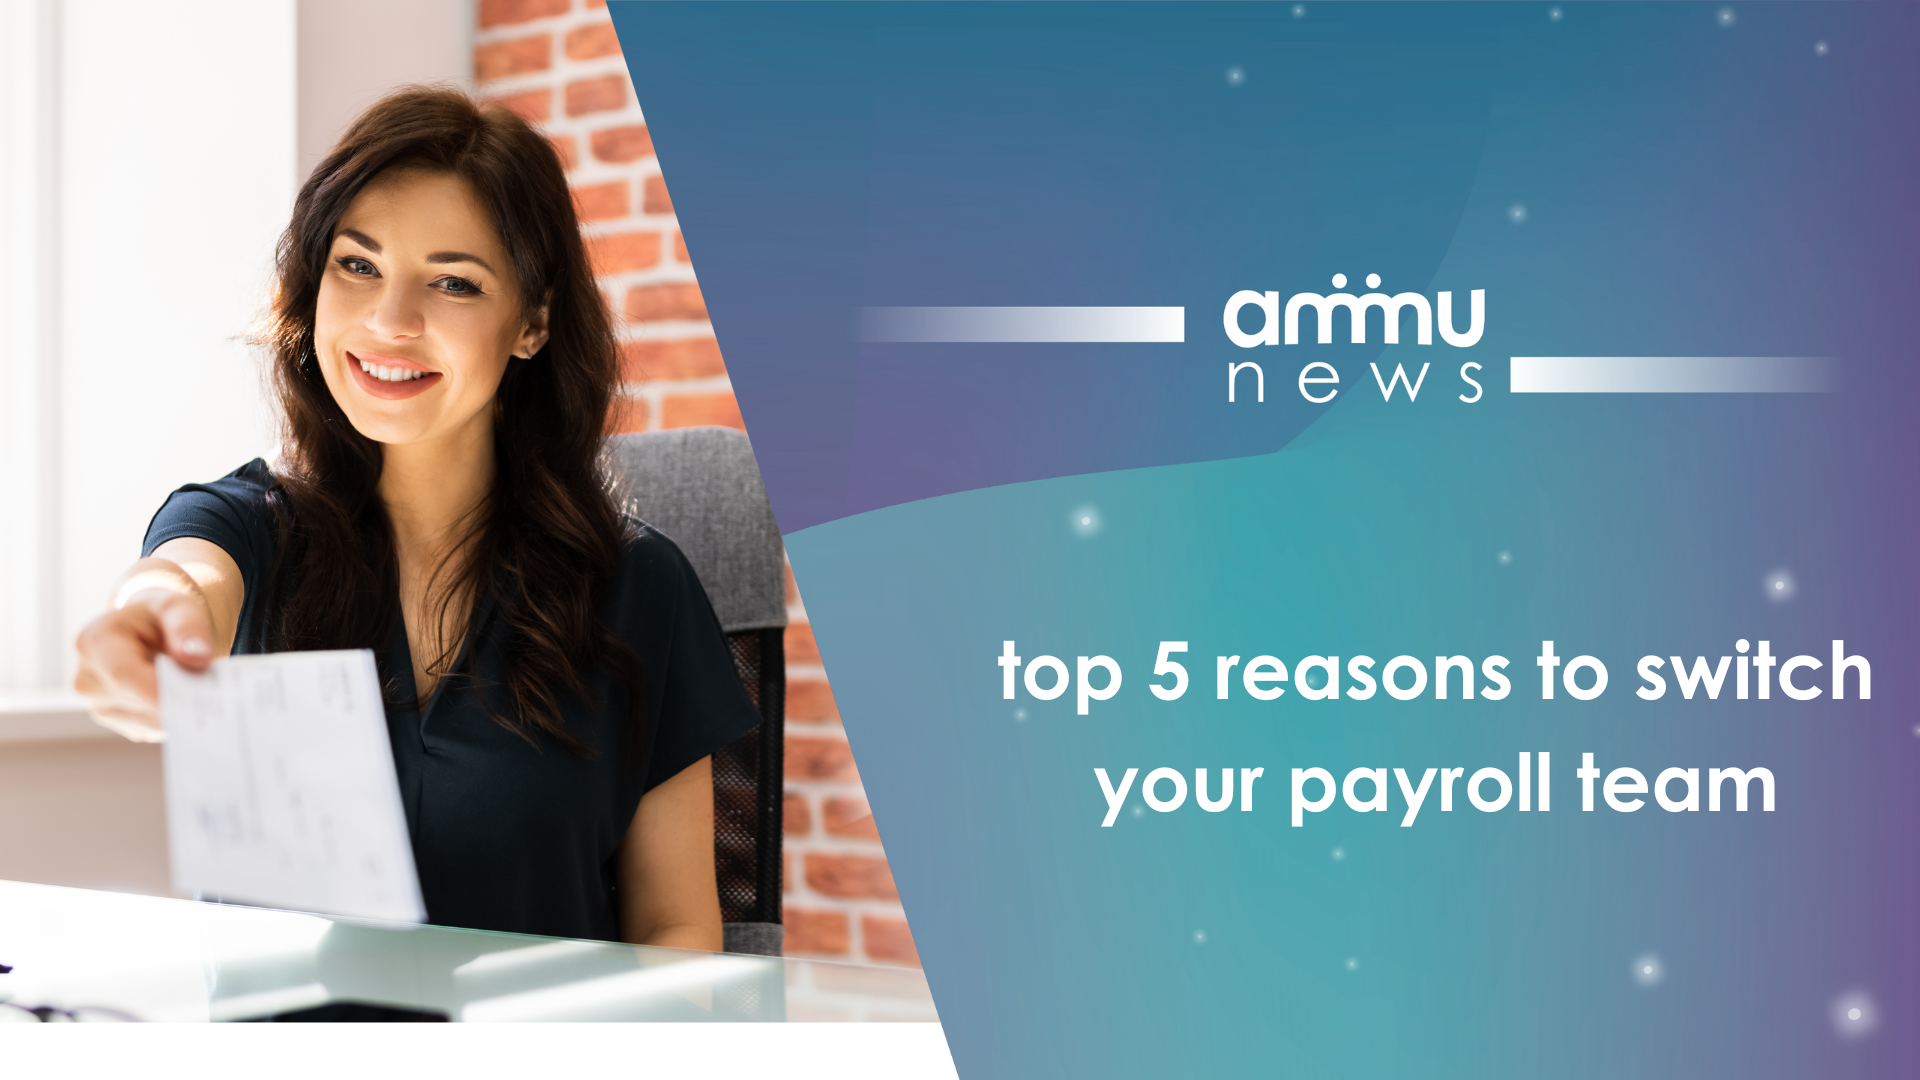 Top 5 reasons to switch your payroll team